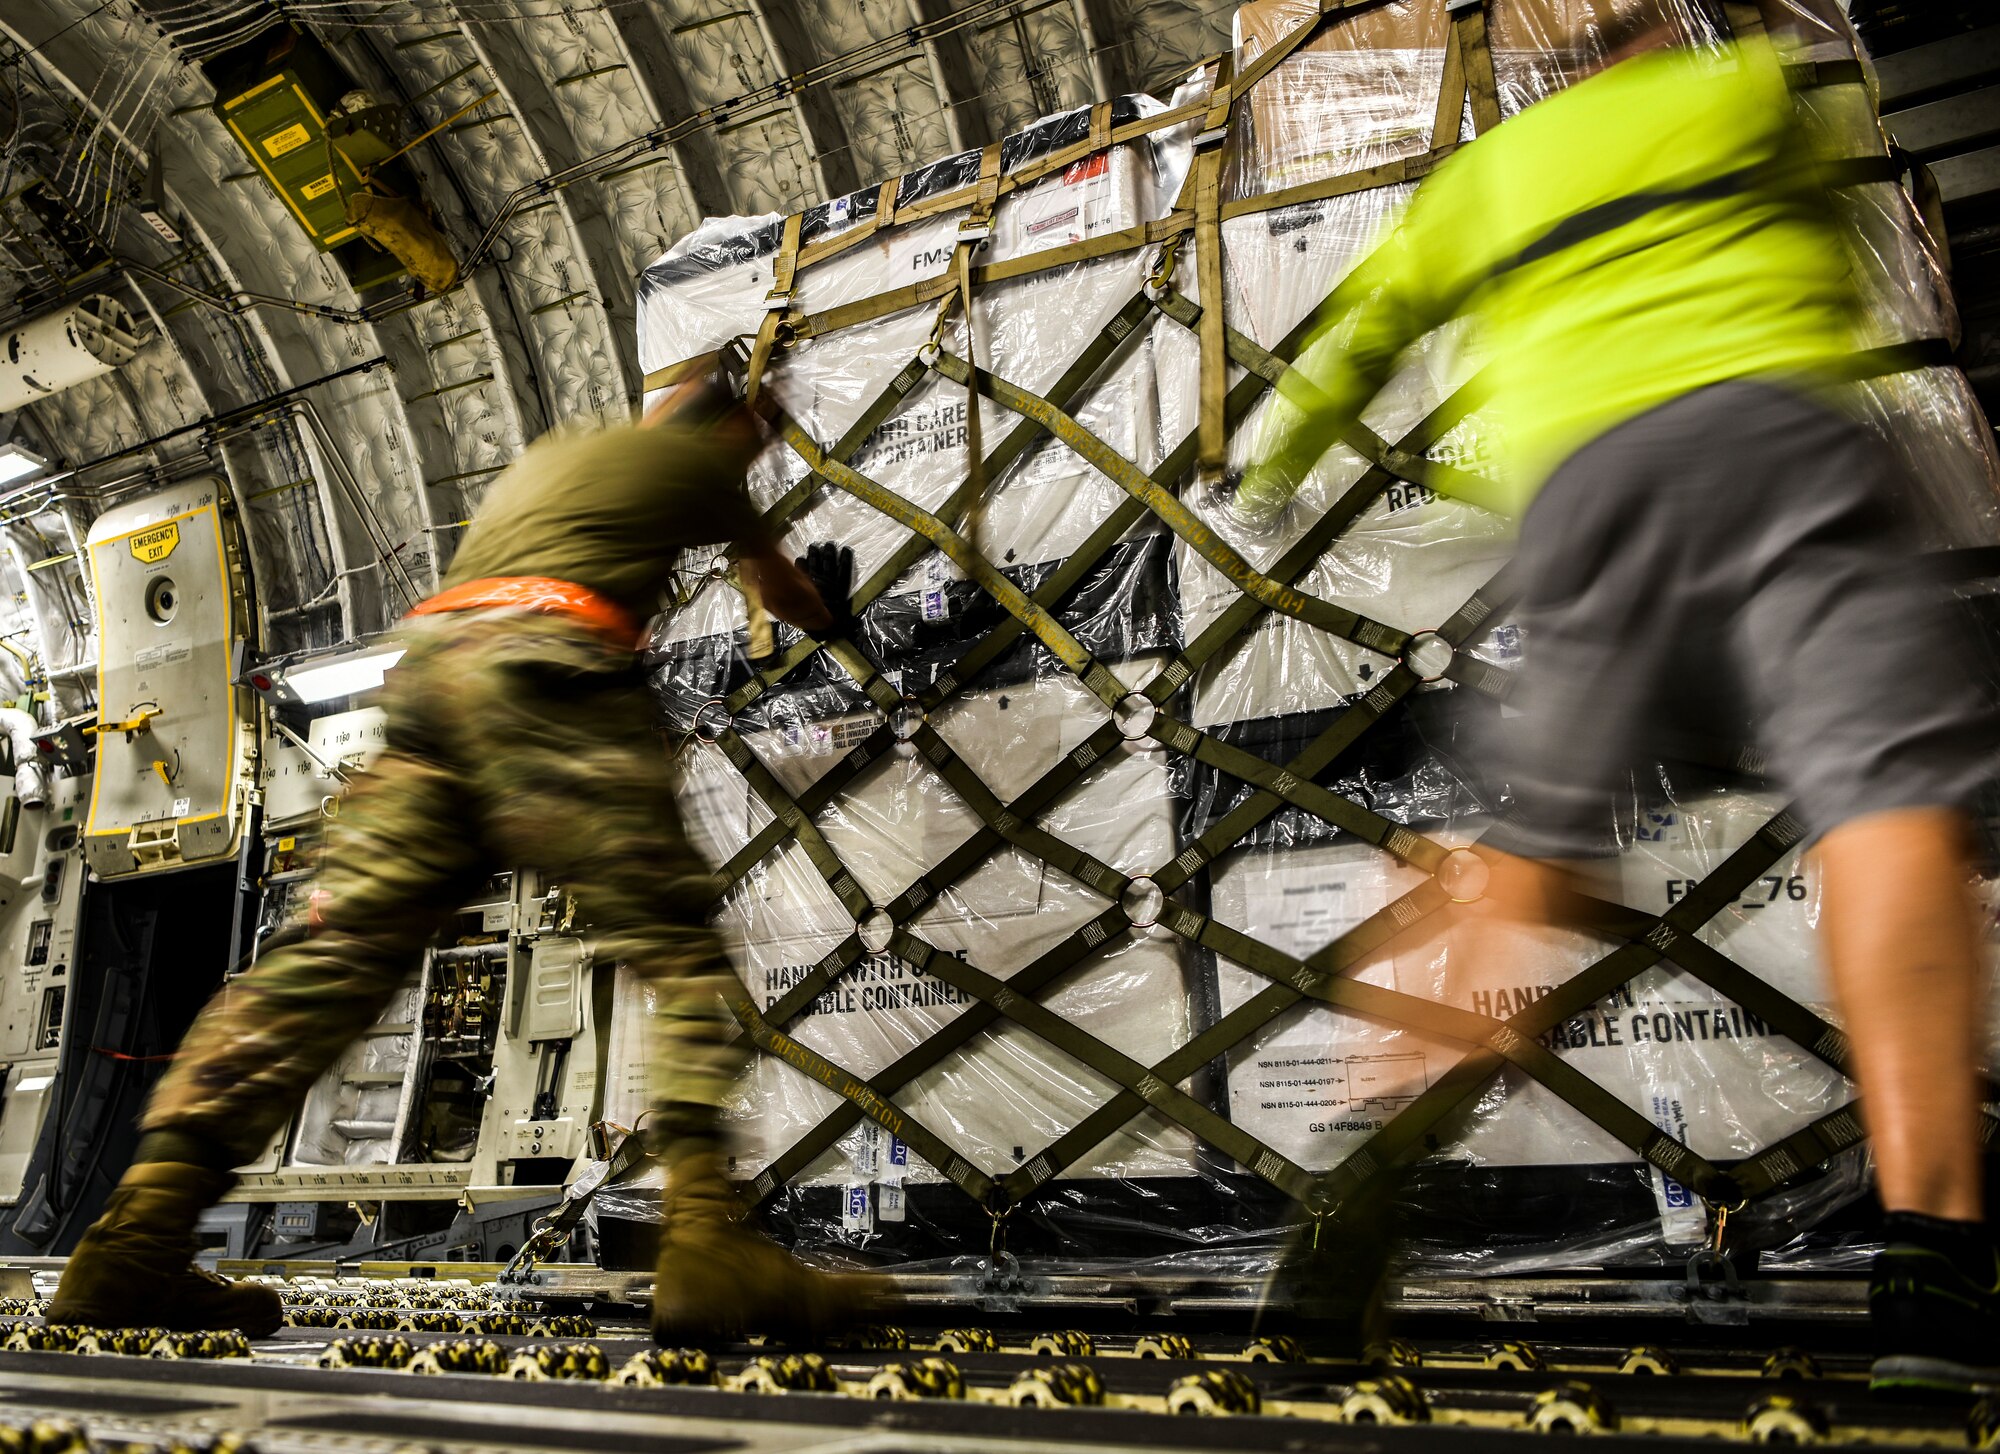 U.S. Air Force Senior Airman Daniel Hofensperger and Bruce Miller, 735th Air Mobility Squadron personnel  moves COVID-19 personal protective equipment and medical supplies onto a  C-17 Globemaster III from the 535th Airlift Squadron at Joint Base Pearl Harbor-Hickam, Hawaii, April  3, 2020. The 735th AMS provided support to the Mariana Islands in response to the COVID-19 pandemic.  

 (U.S. Air Force photo by Tech. Sgt. Anthony Nelson Jr.)